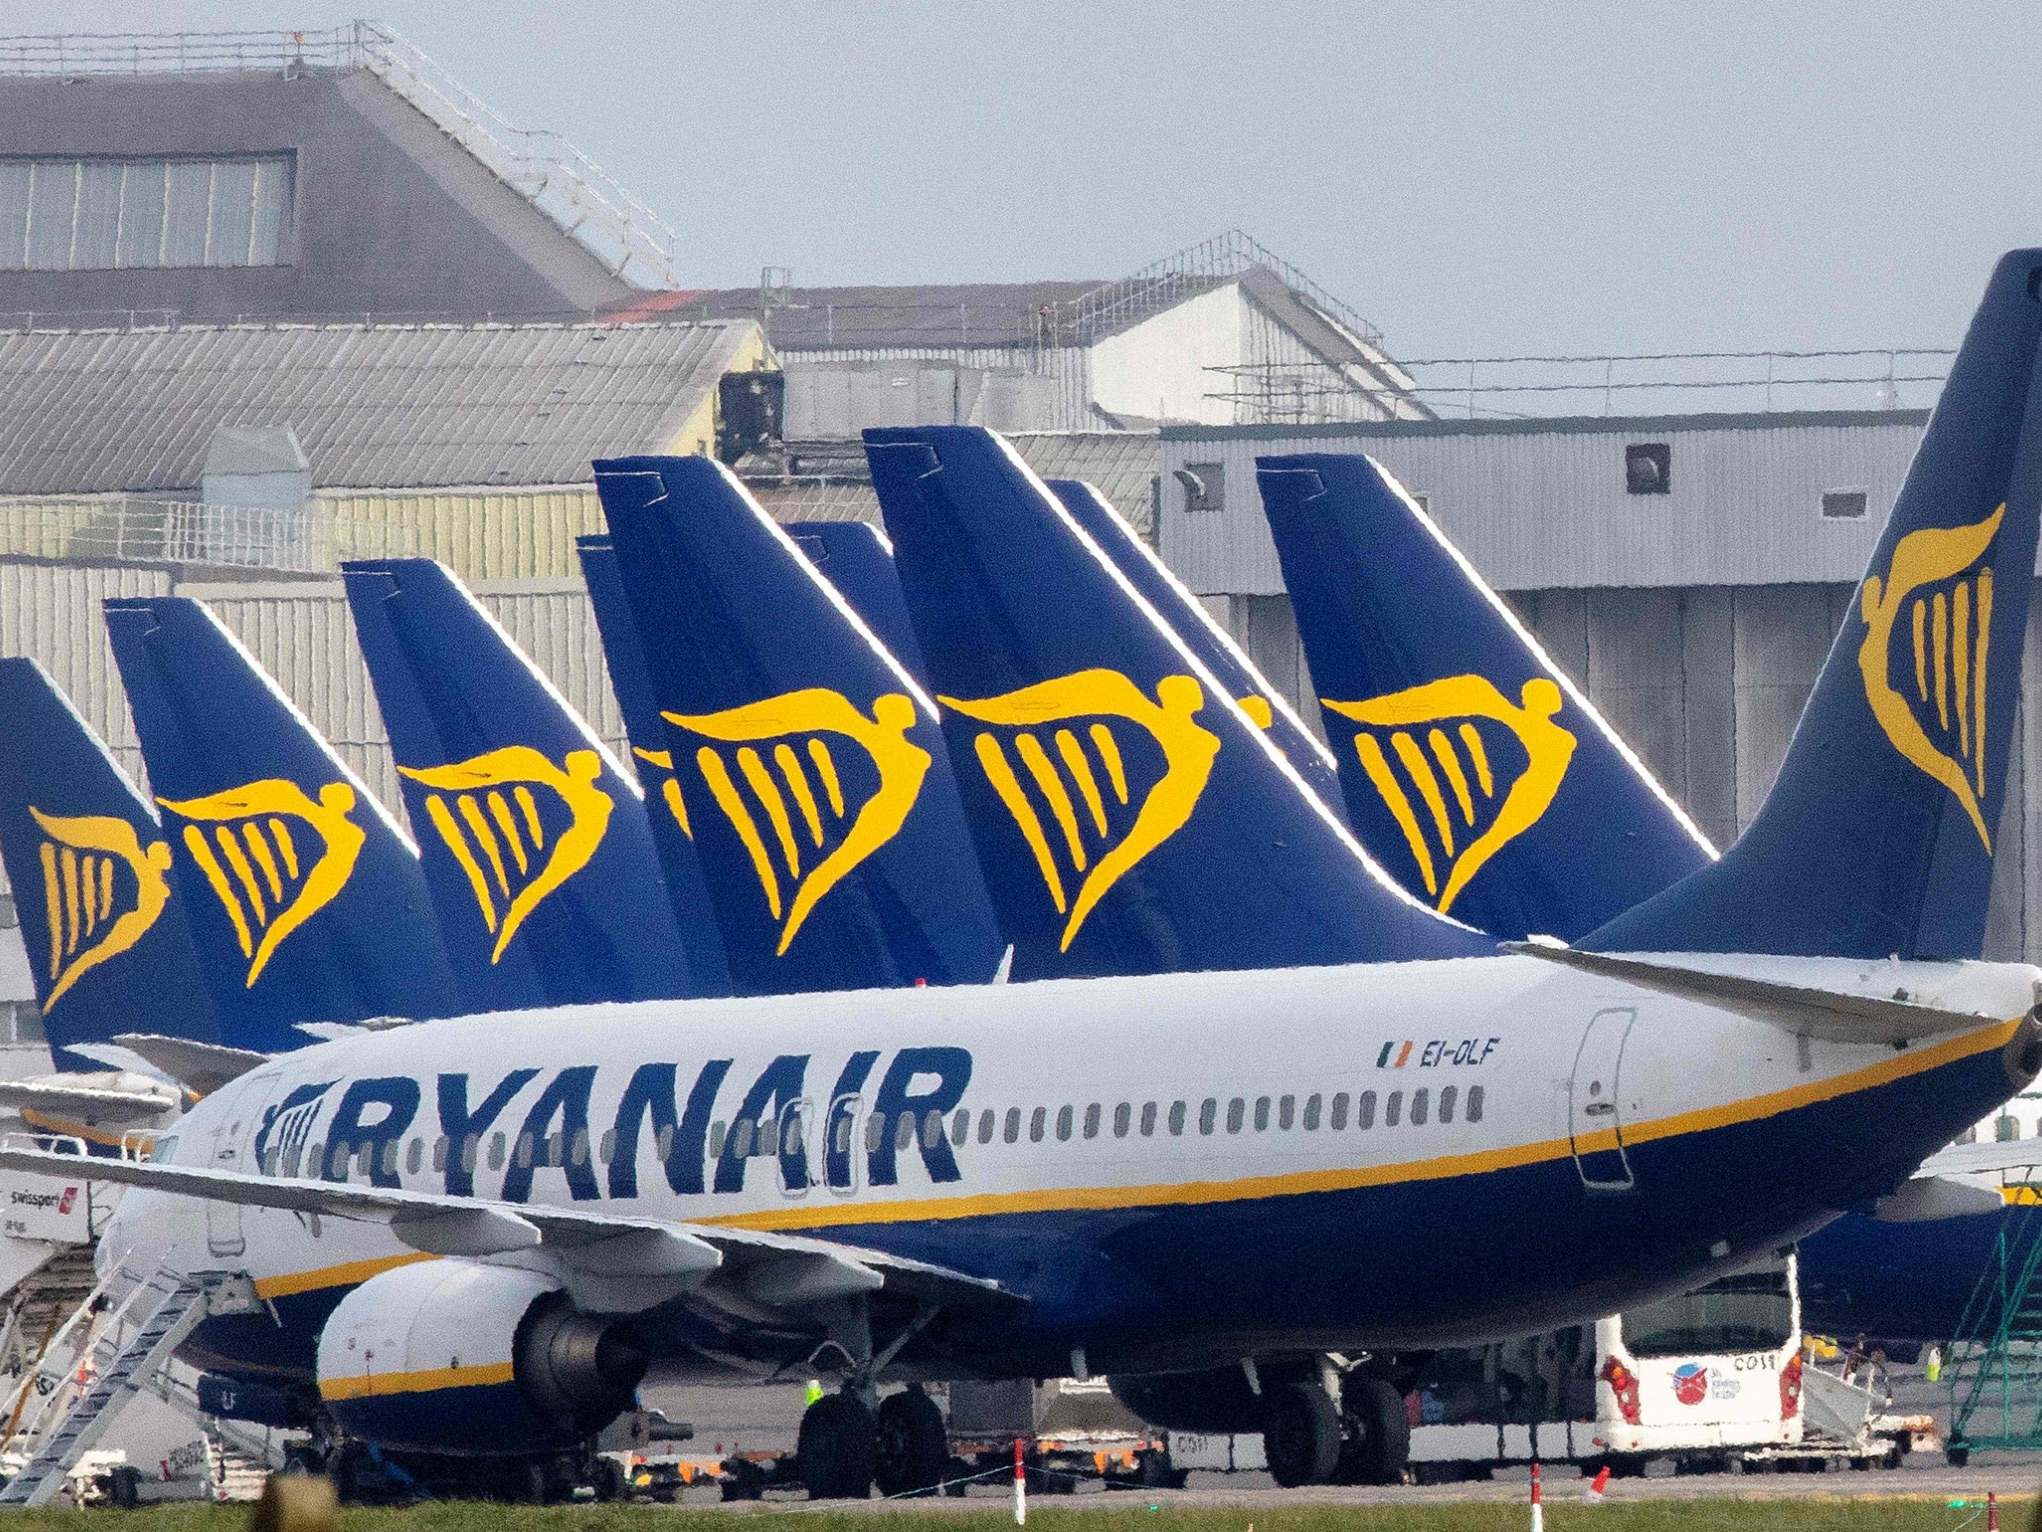 Ryanair has criticised the government for imposing a 14-day quarantine on passengers returning from Spain